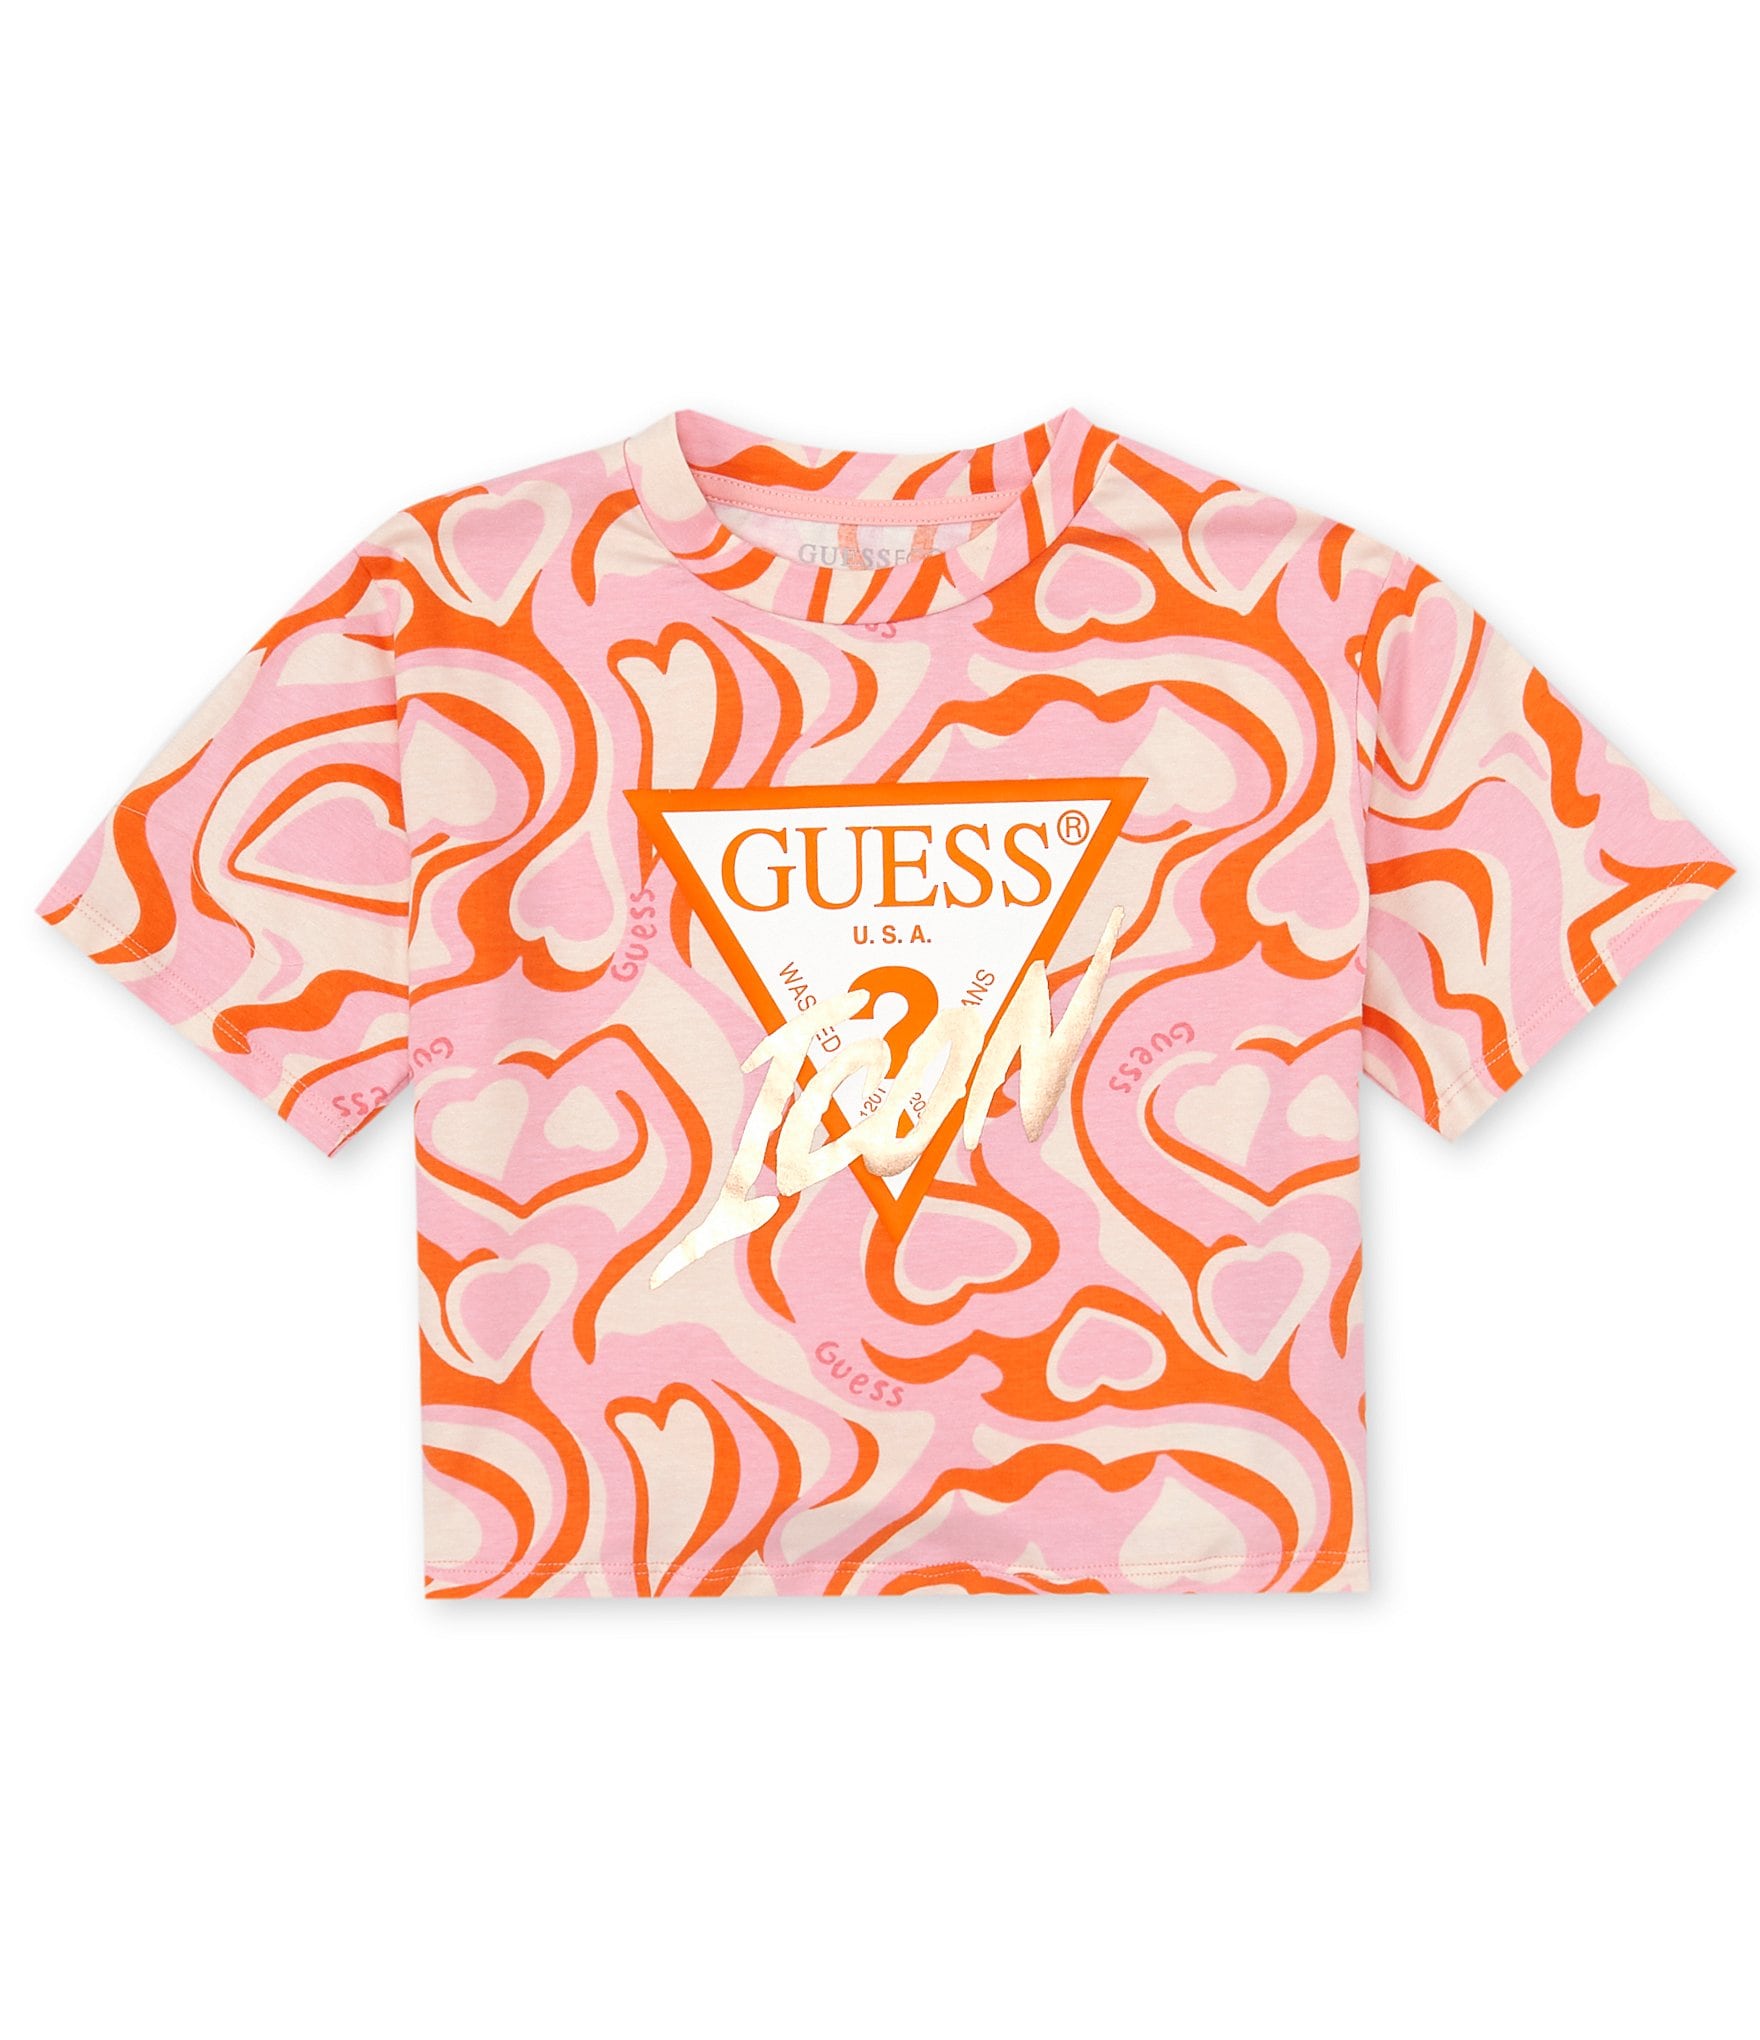 Guess Big Girls Graphic Design Tee |